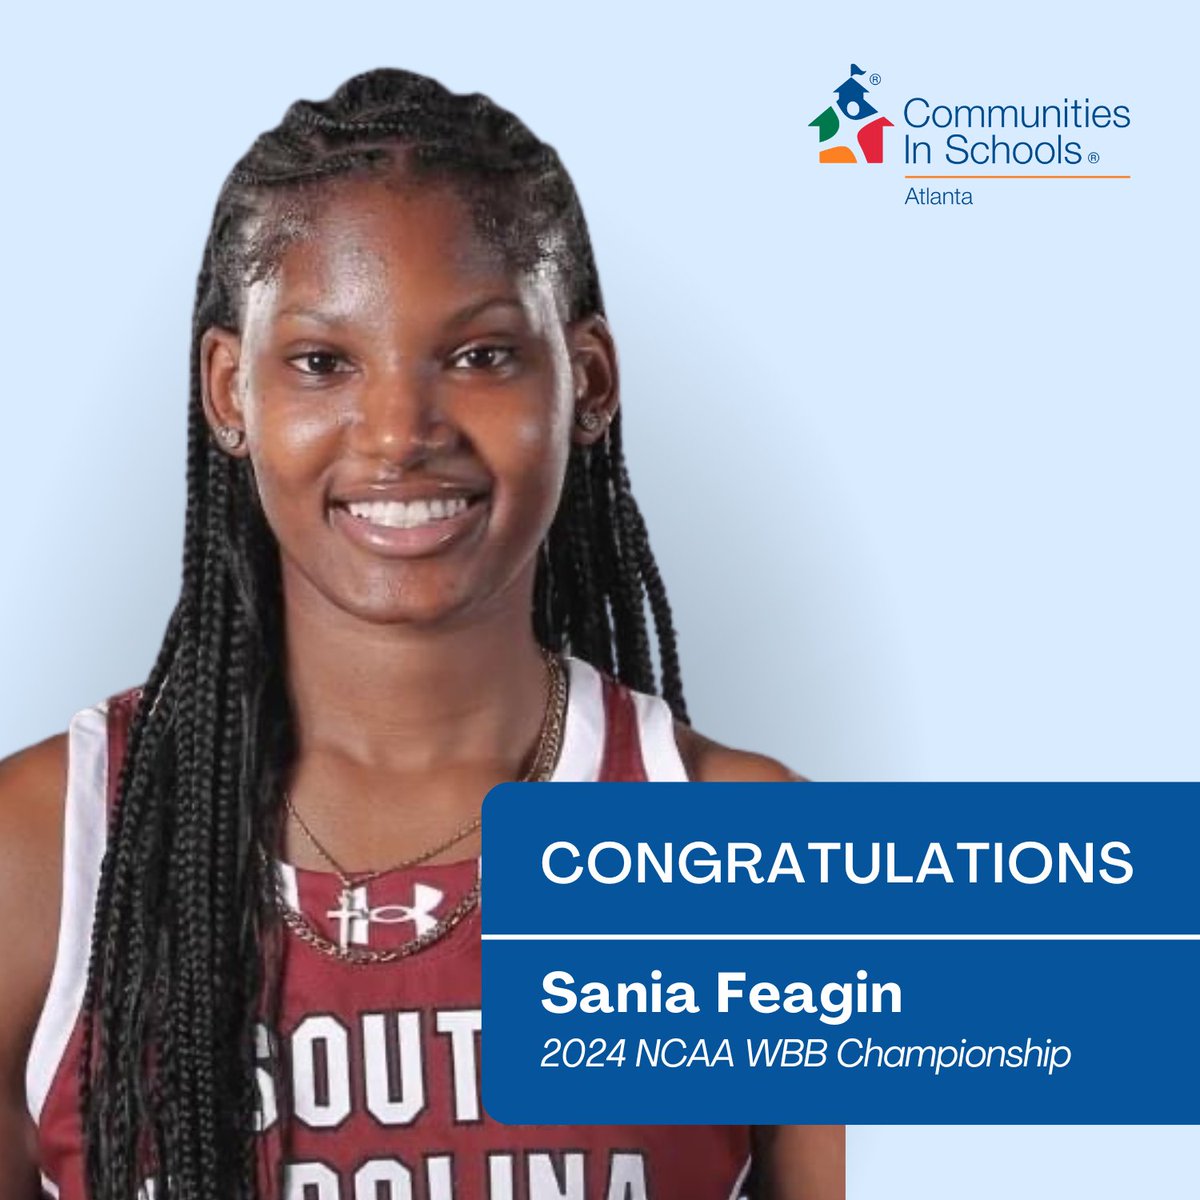 Congratulations to former Forest Park High School graduate Sania Feagin! Sania left it all on the court this month, winning the 2024 NCAA Women's Basketball Championship as a member of the undefeated University of South Carolina Women's Basketball team. #allinforkids